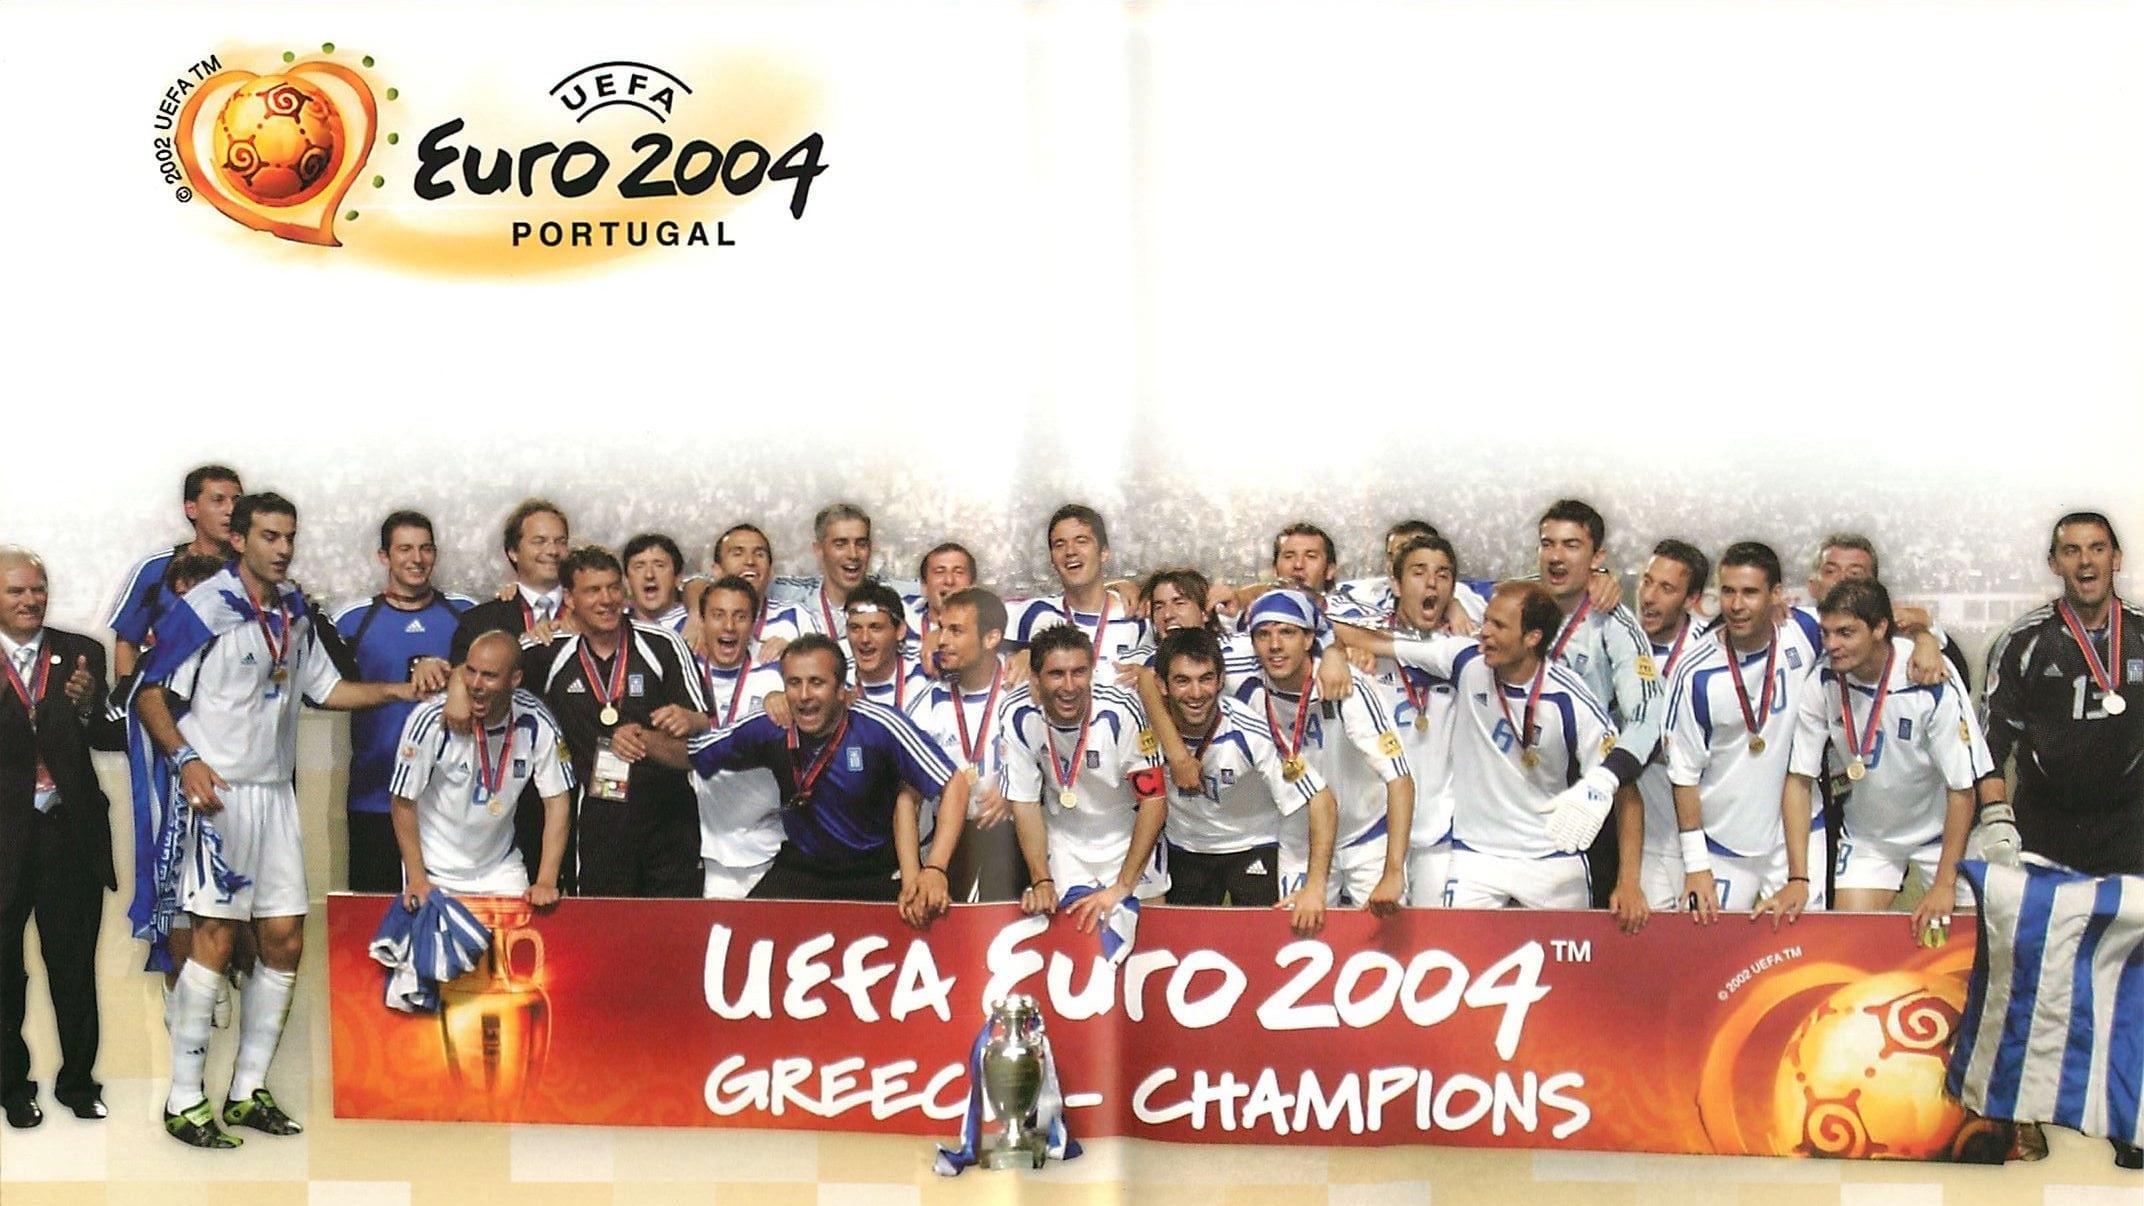 The Official Review of UEFA Euro 2004 backdrop